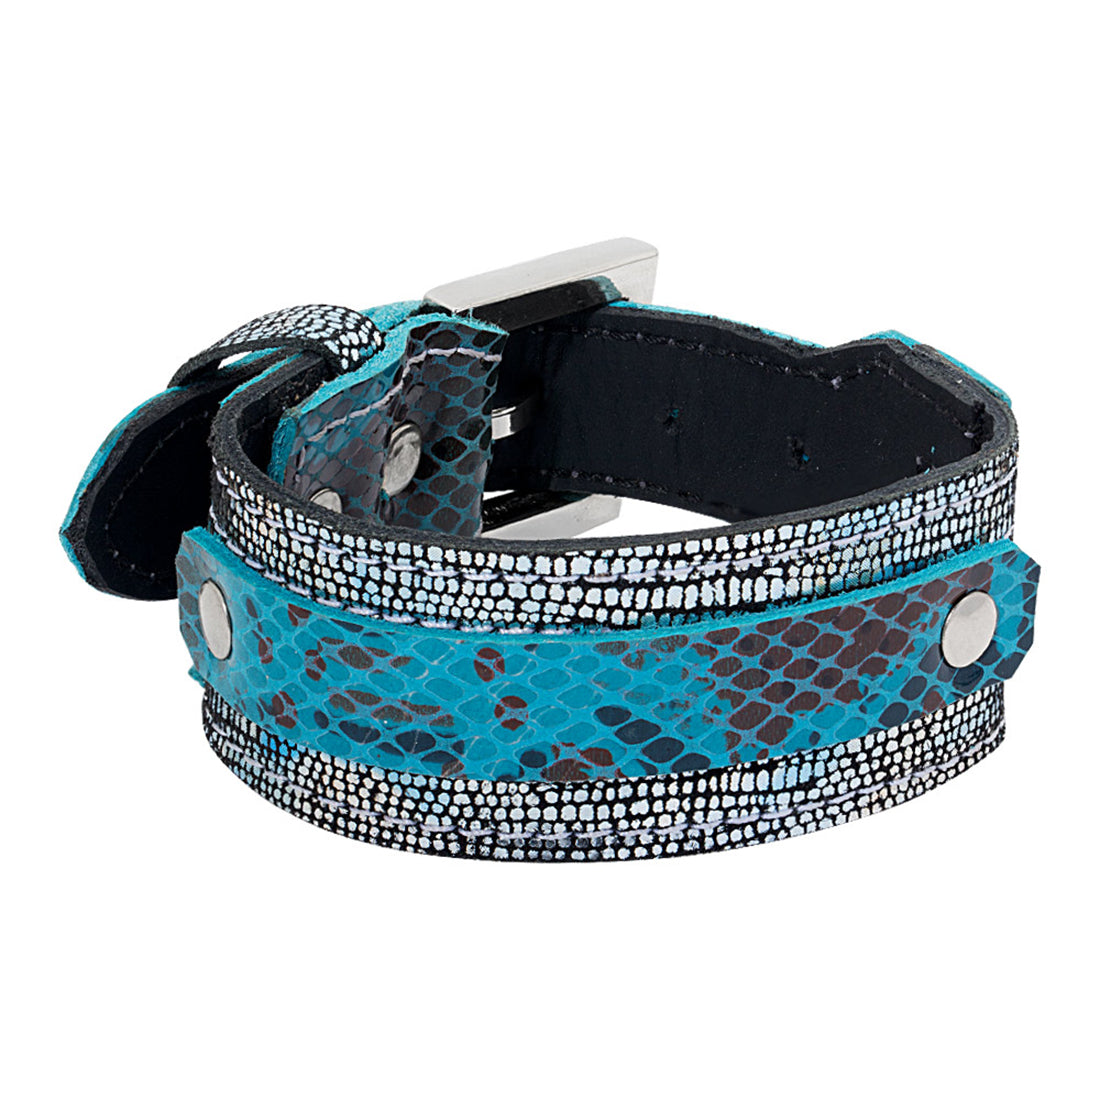 Buckled Snake Skin Pattern Bracelet from Leather Trend Collection